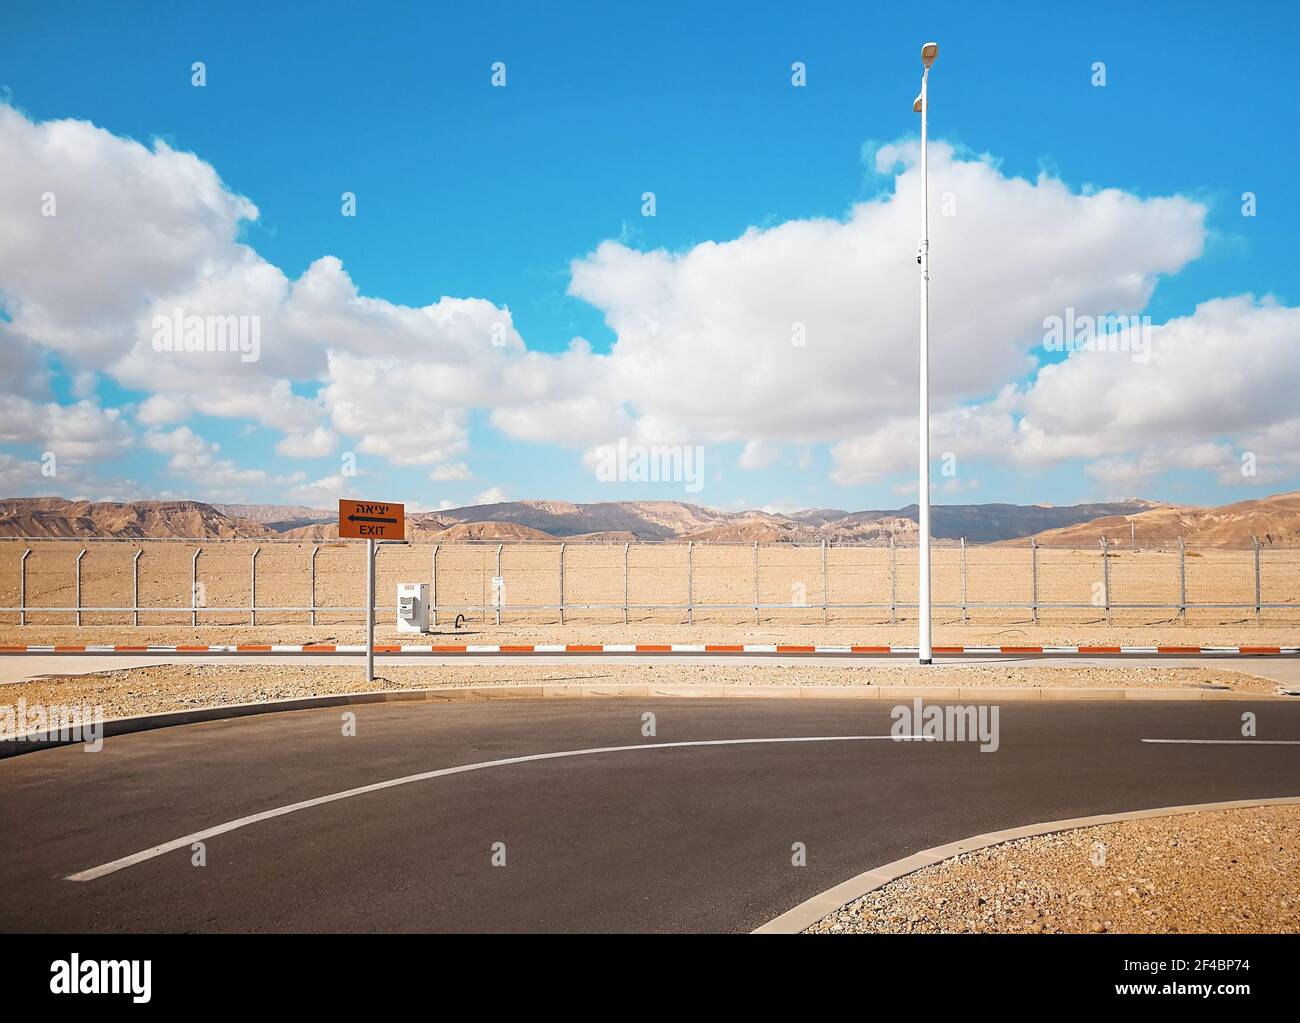 Empty road near Eilat airport parking lot with exit sign (English and Israeli translation), low mountains behind fence in distance Stock Photo